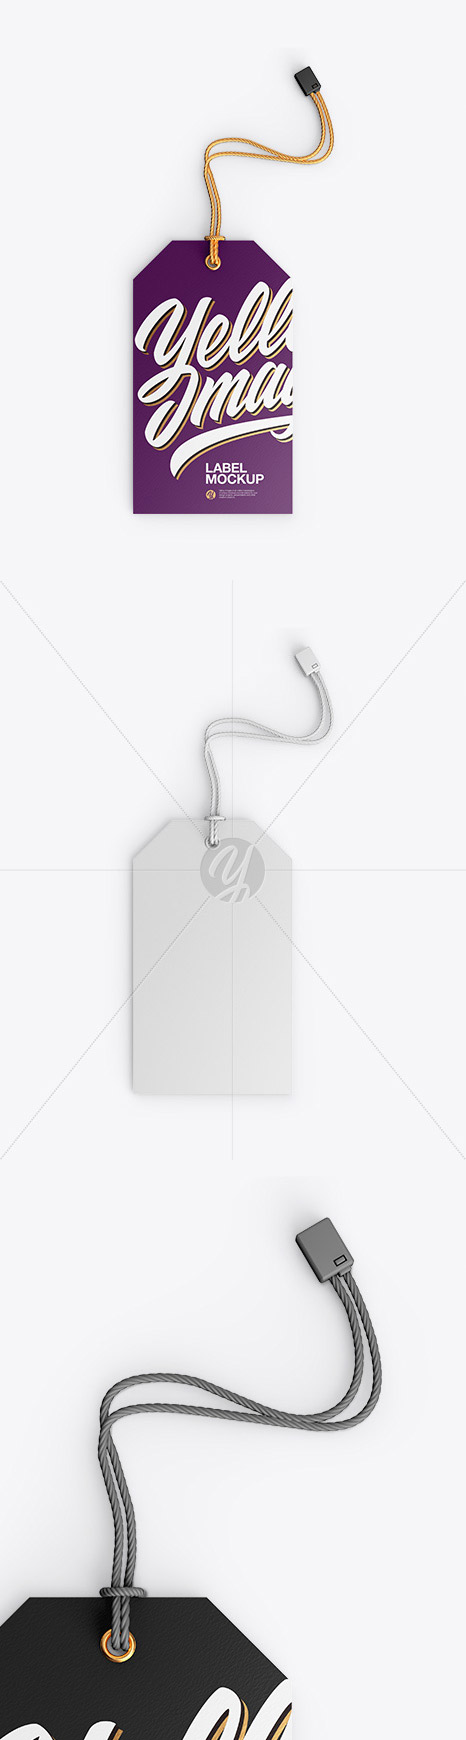 Paper Label With Rope Mockup 43779